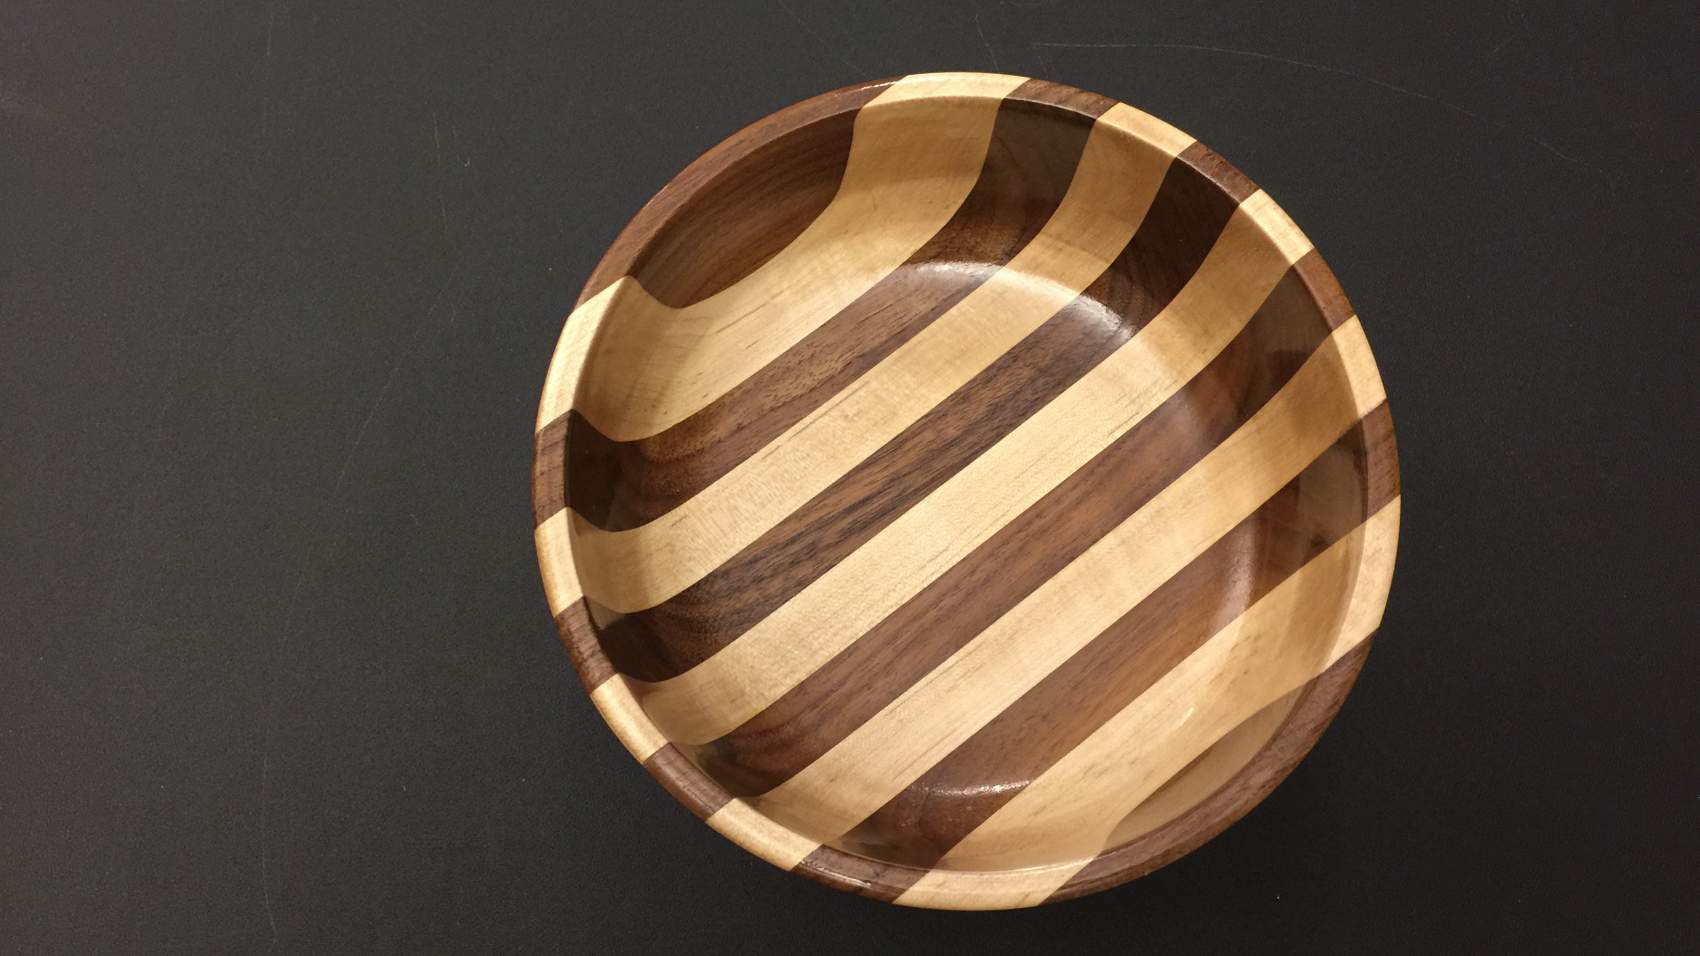 Maurice Cummings, “Laminated Walnut/Maple Bowl,” was first place amateur in Sculpture/3-D.